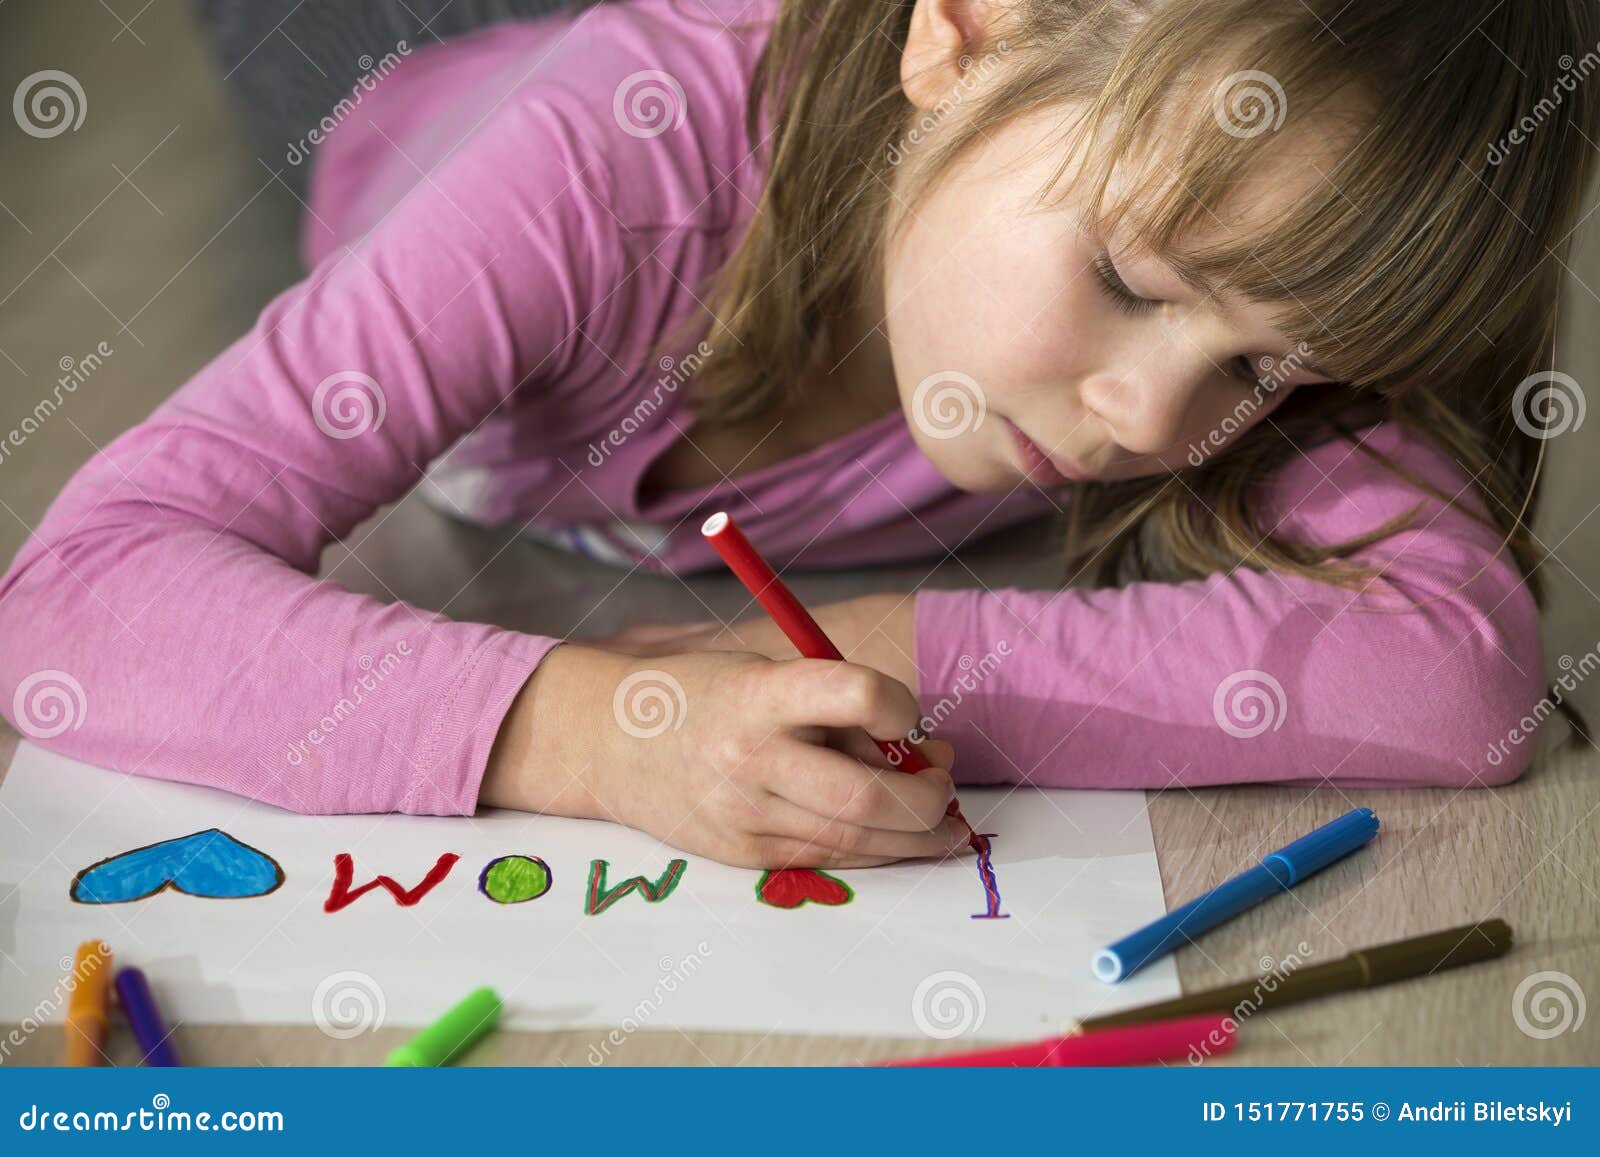 Miss circle fundamental paper education art. Girl with Crayons. Мисс циркуль fundamental paper Education. Girl is colouring with Crayons. Child drawing Table close-up.